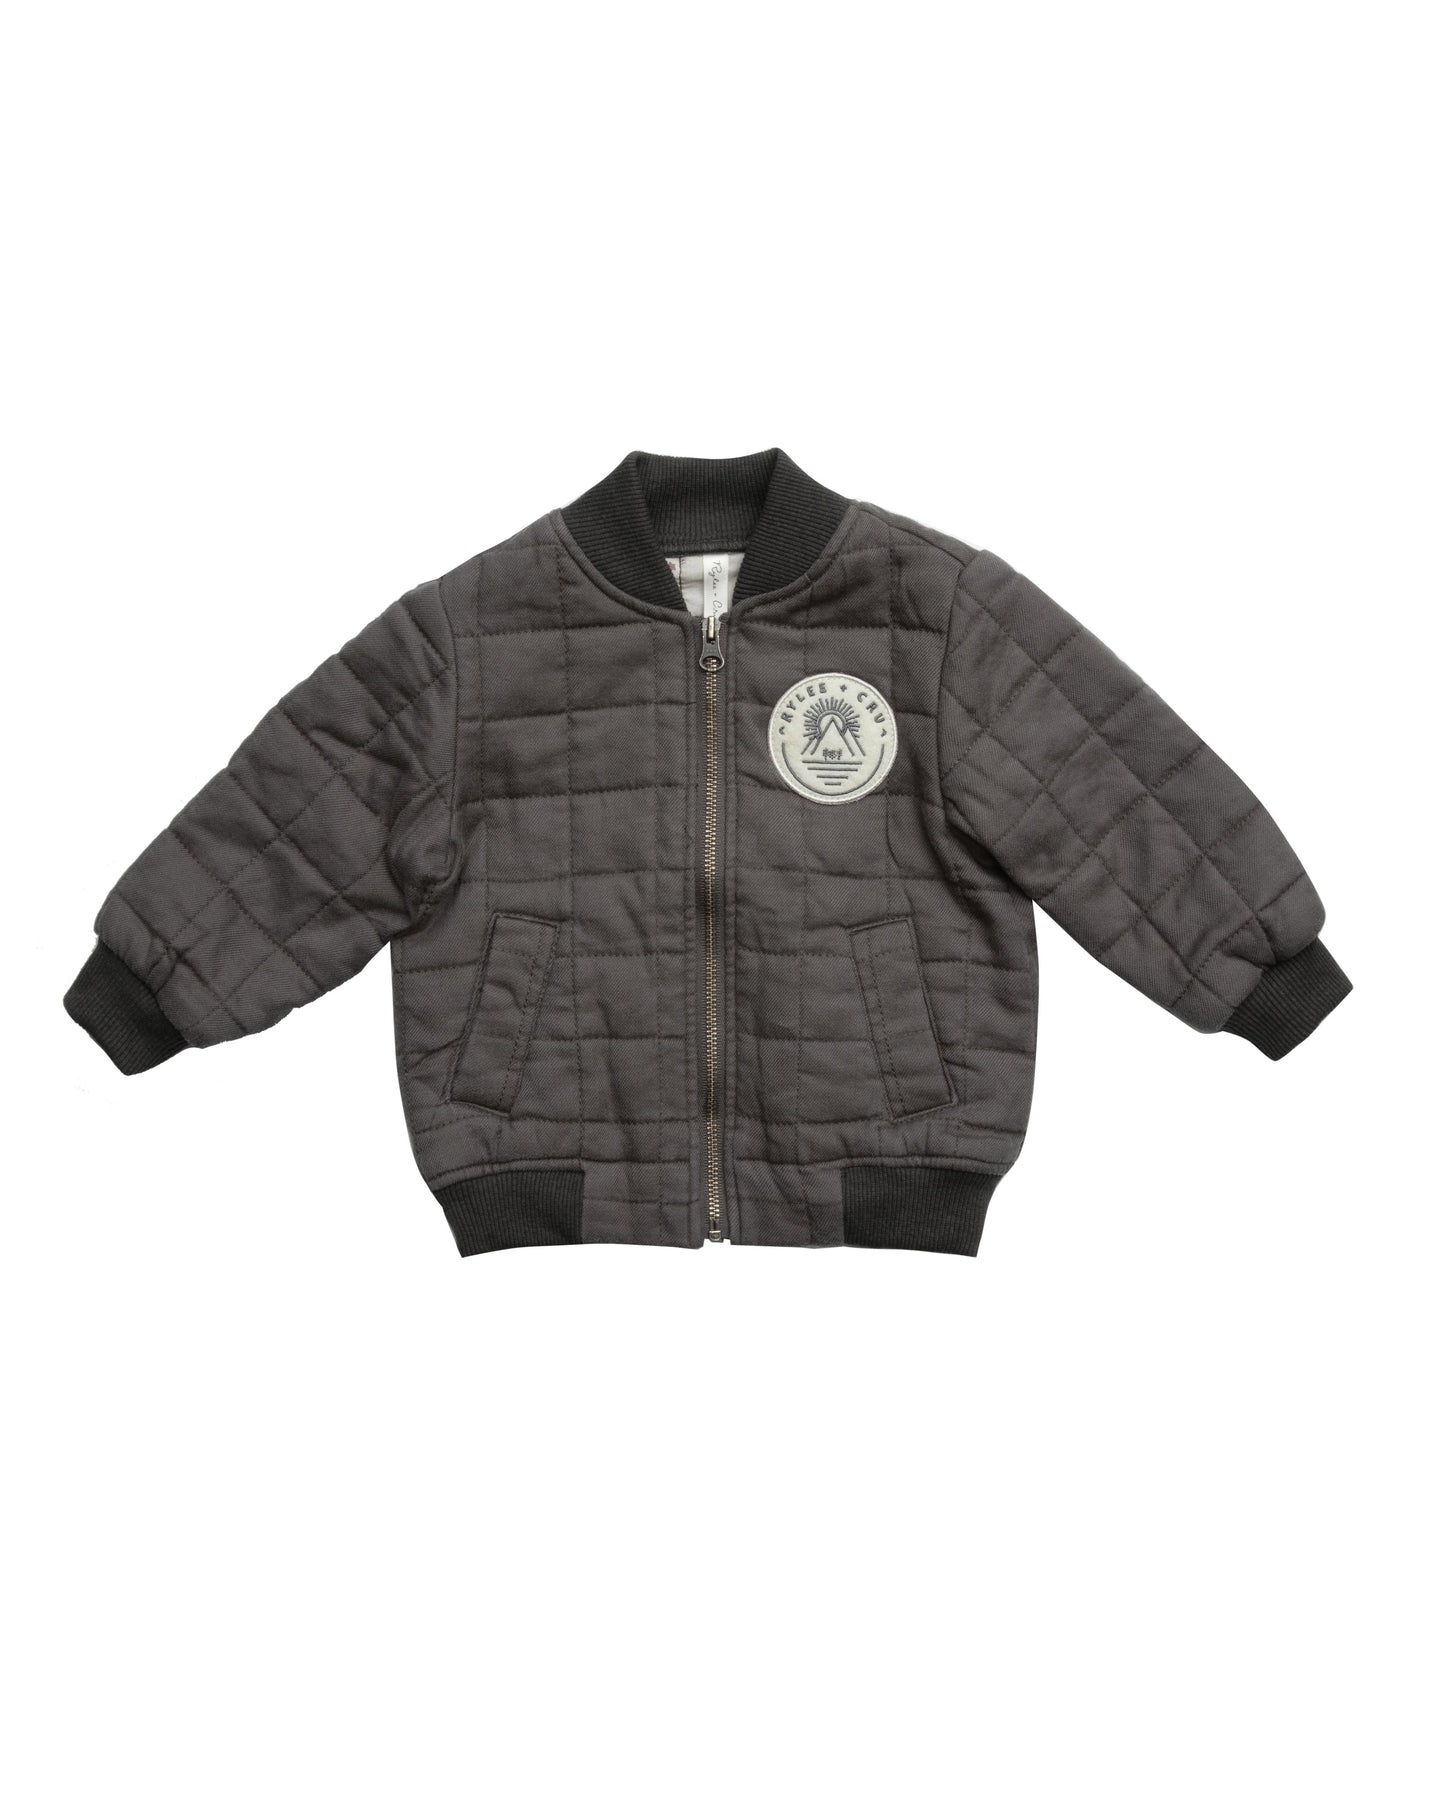 Rylee + Cru - Charcoal Quilted Bomber Jacket - Charcoal